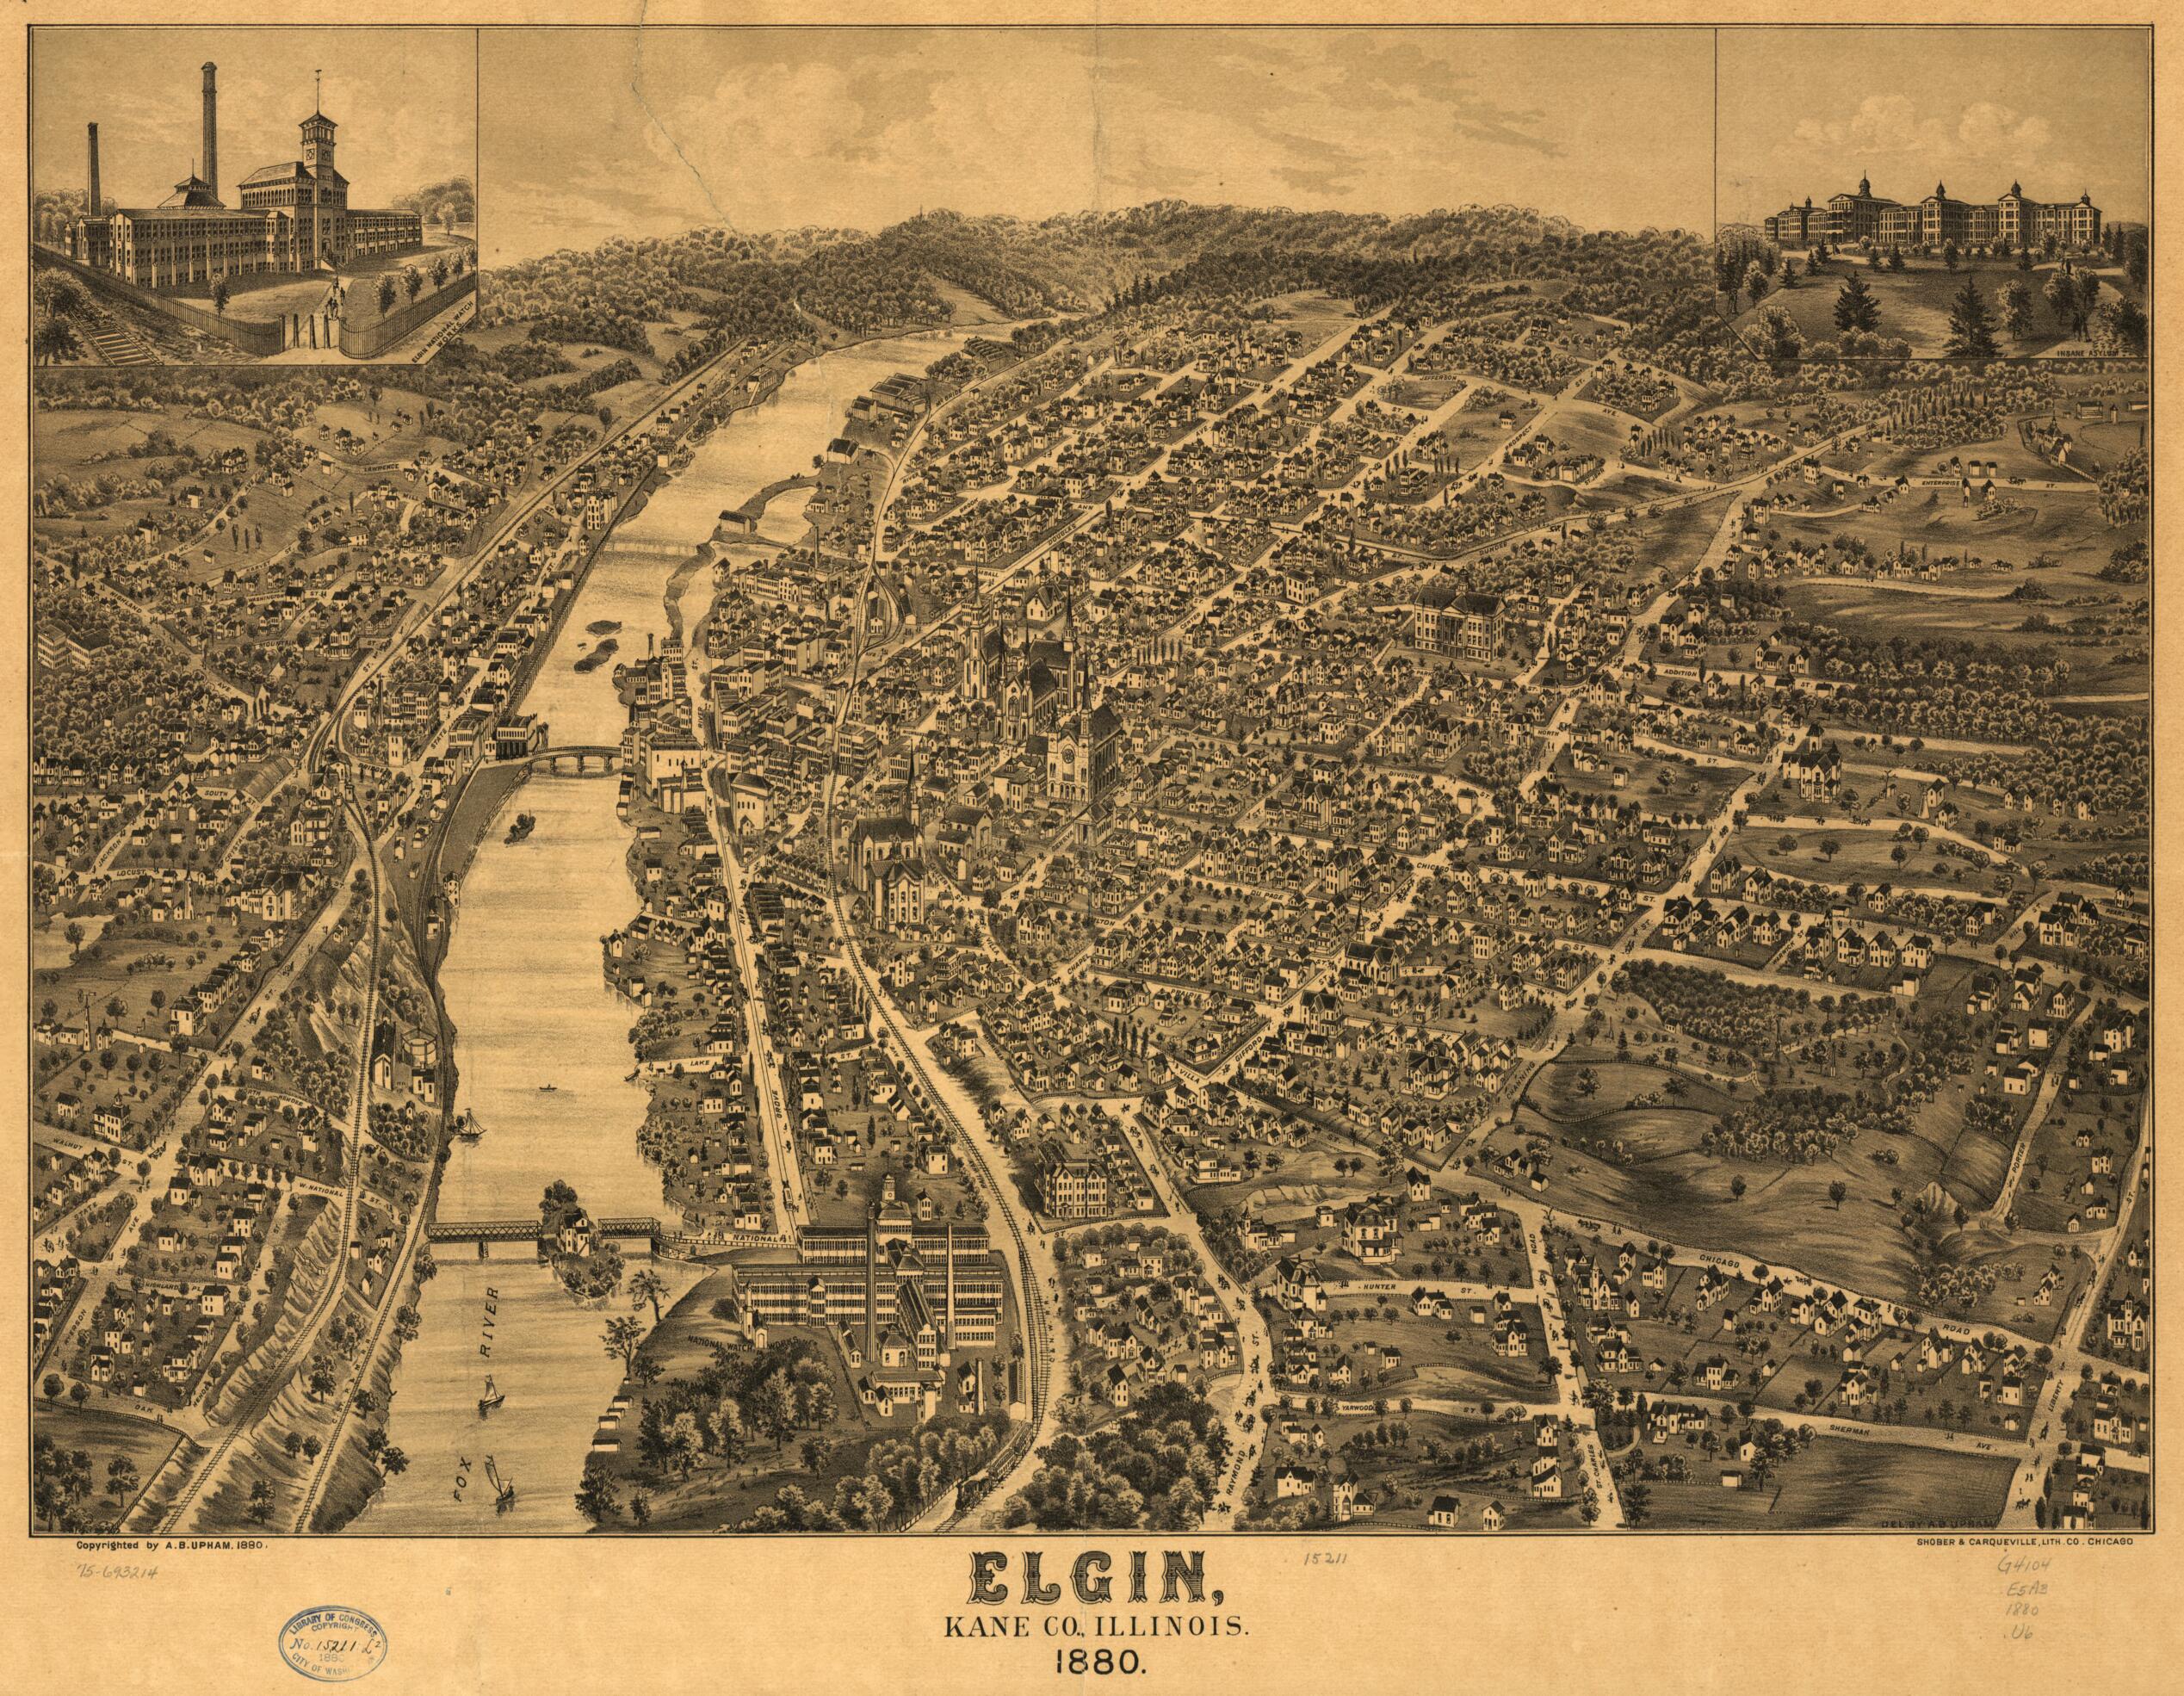 This old map of Elgin, Kane County, Illinois from 1880 was created by  Shober &amp; Carqueville, A. B. Upham in 1880